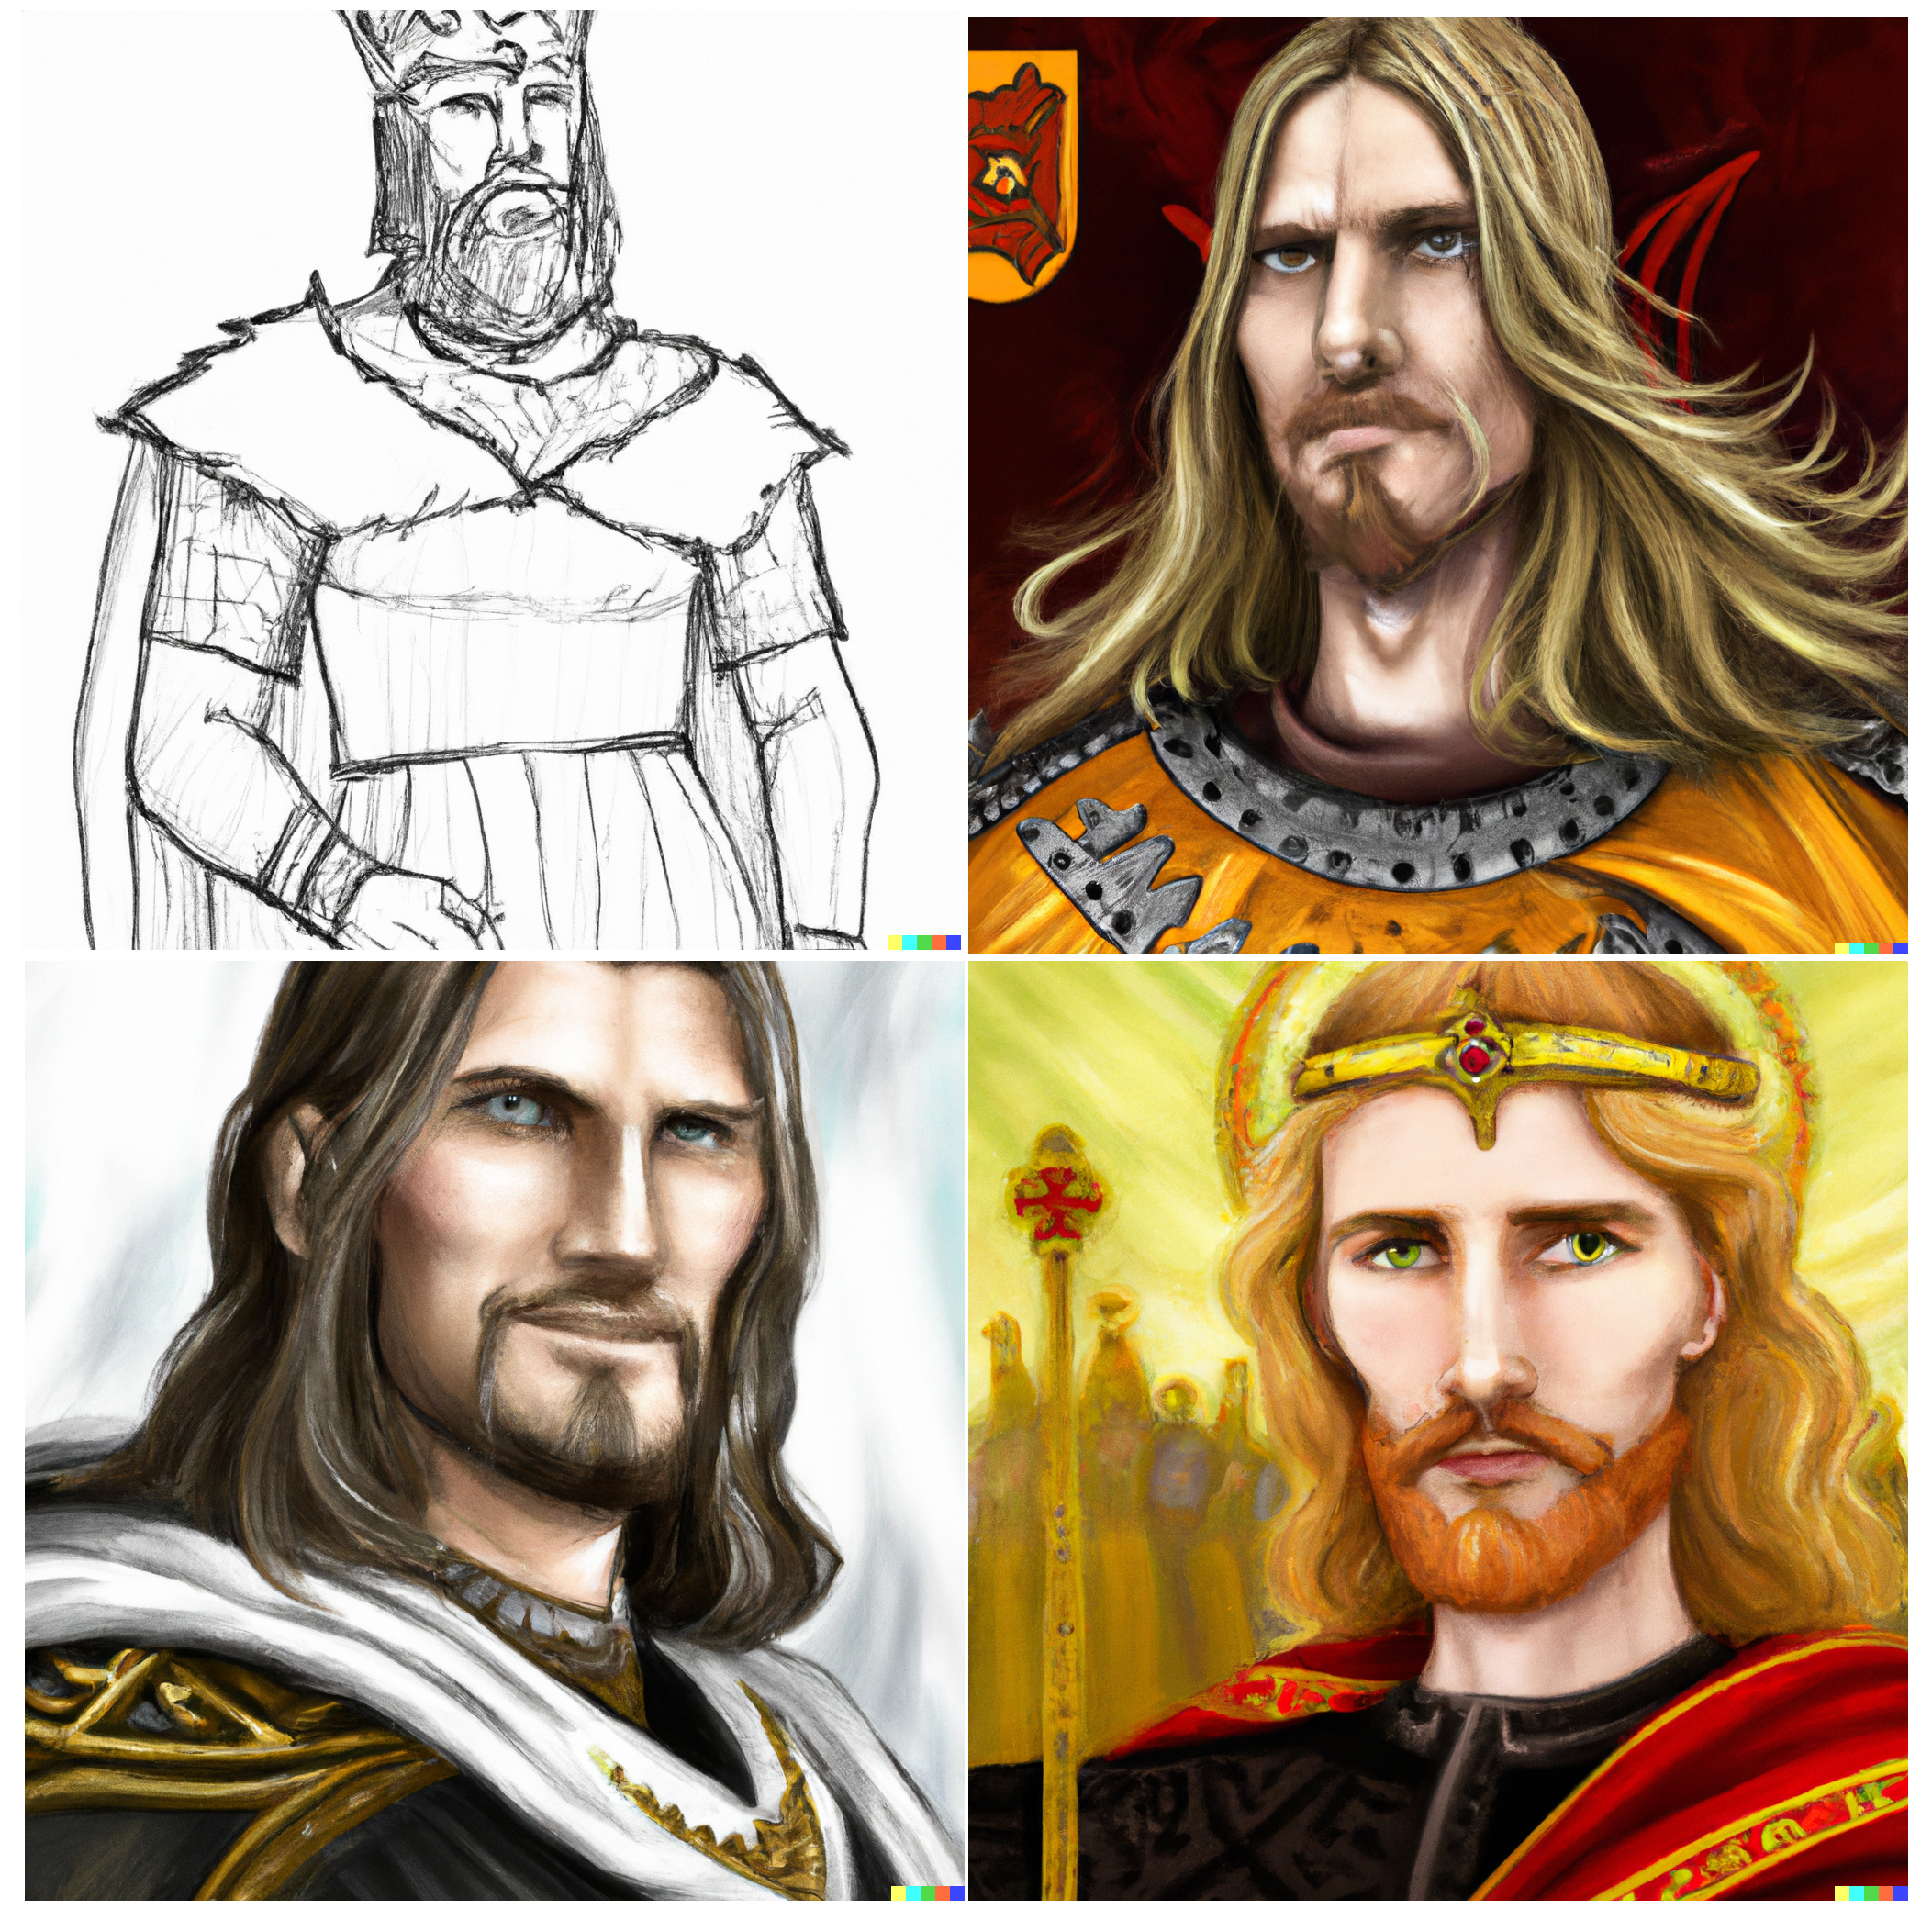 Four different medievalist images of a man with a beard and expensive clothes, which at first glance might look like they were created using various analogue techniques such as pencil sketching.